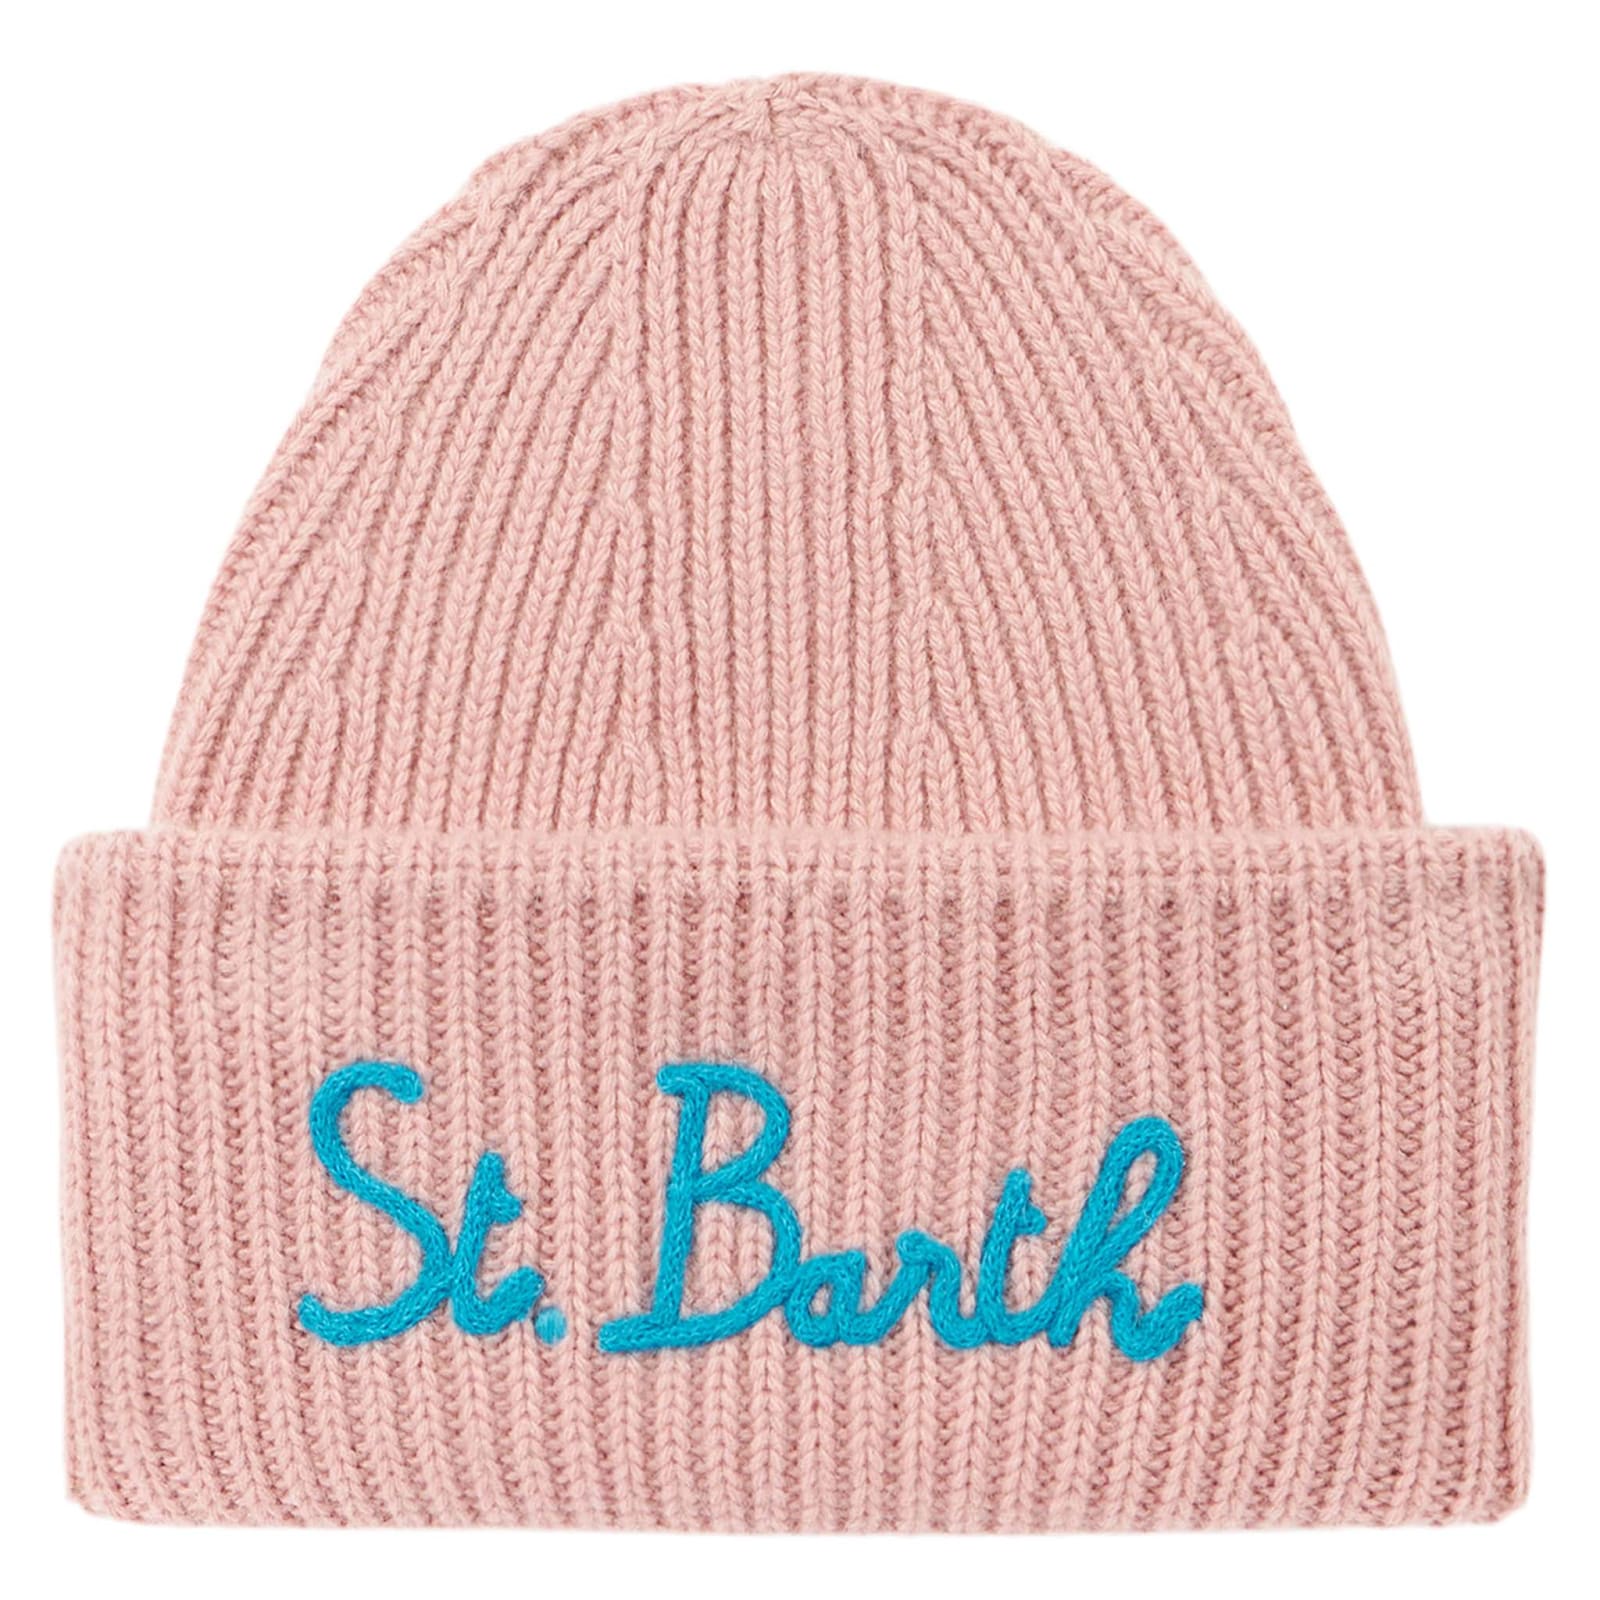 Woman Knit Beanie With St. Barth Embroidery